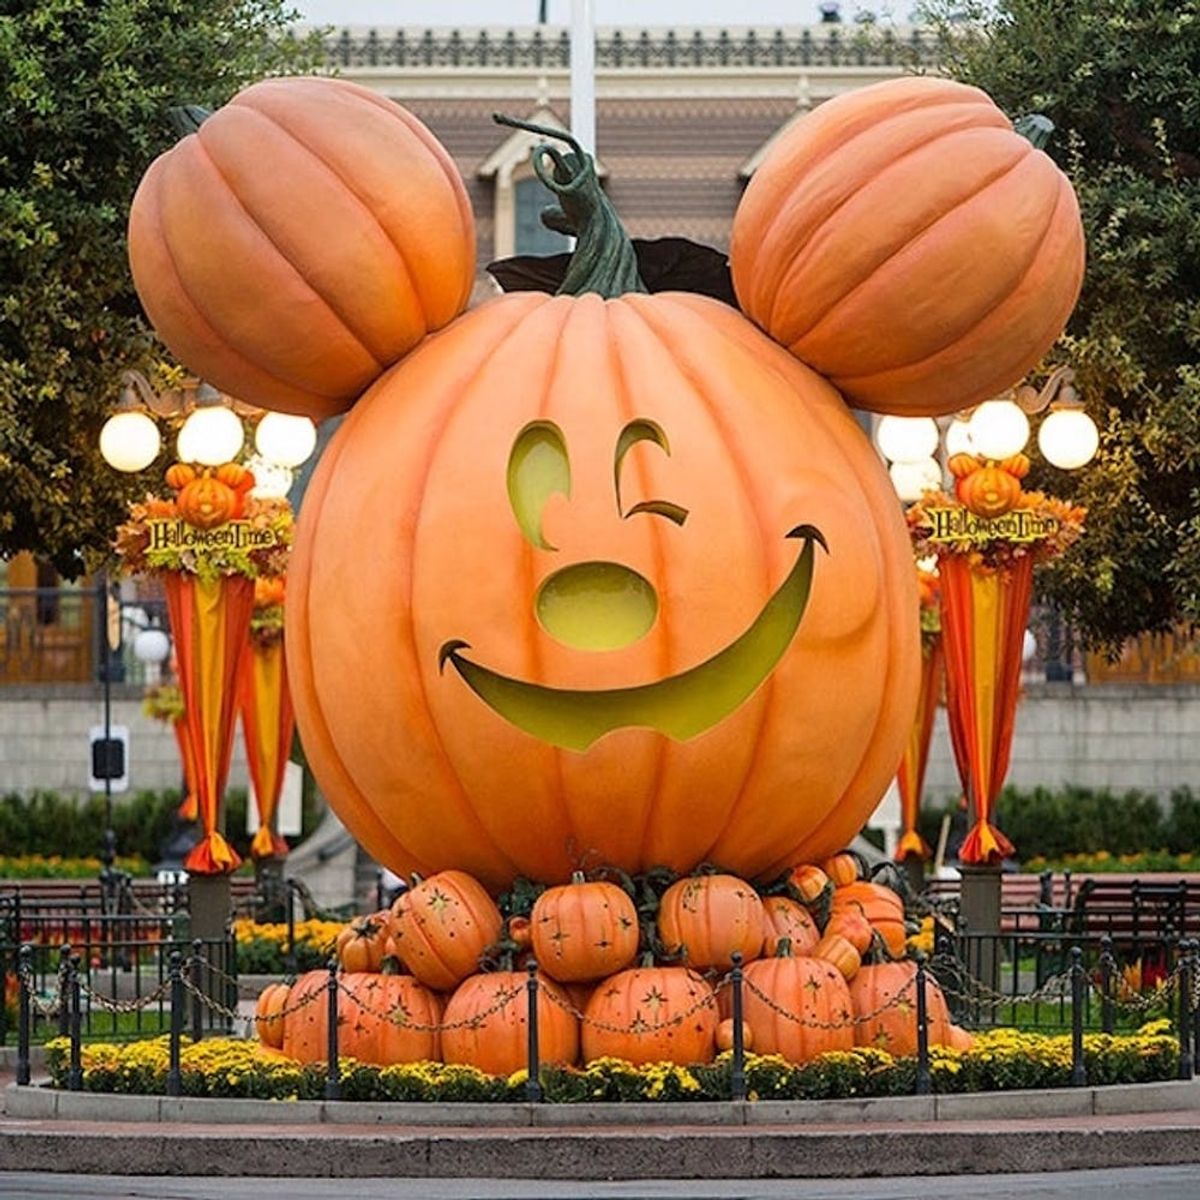 7 Reasons Disneyland’s Mickey’s Halloween Party Is a Total MUST